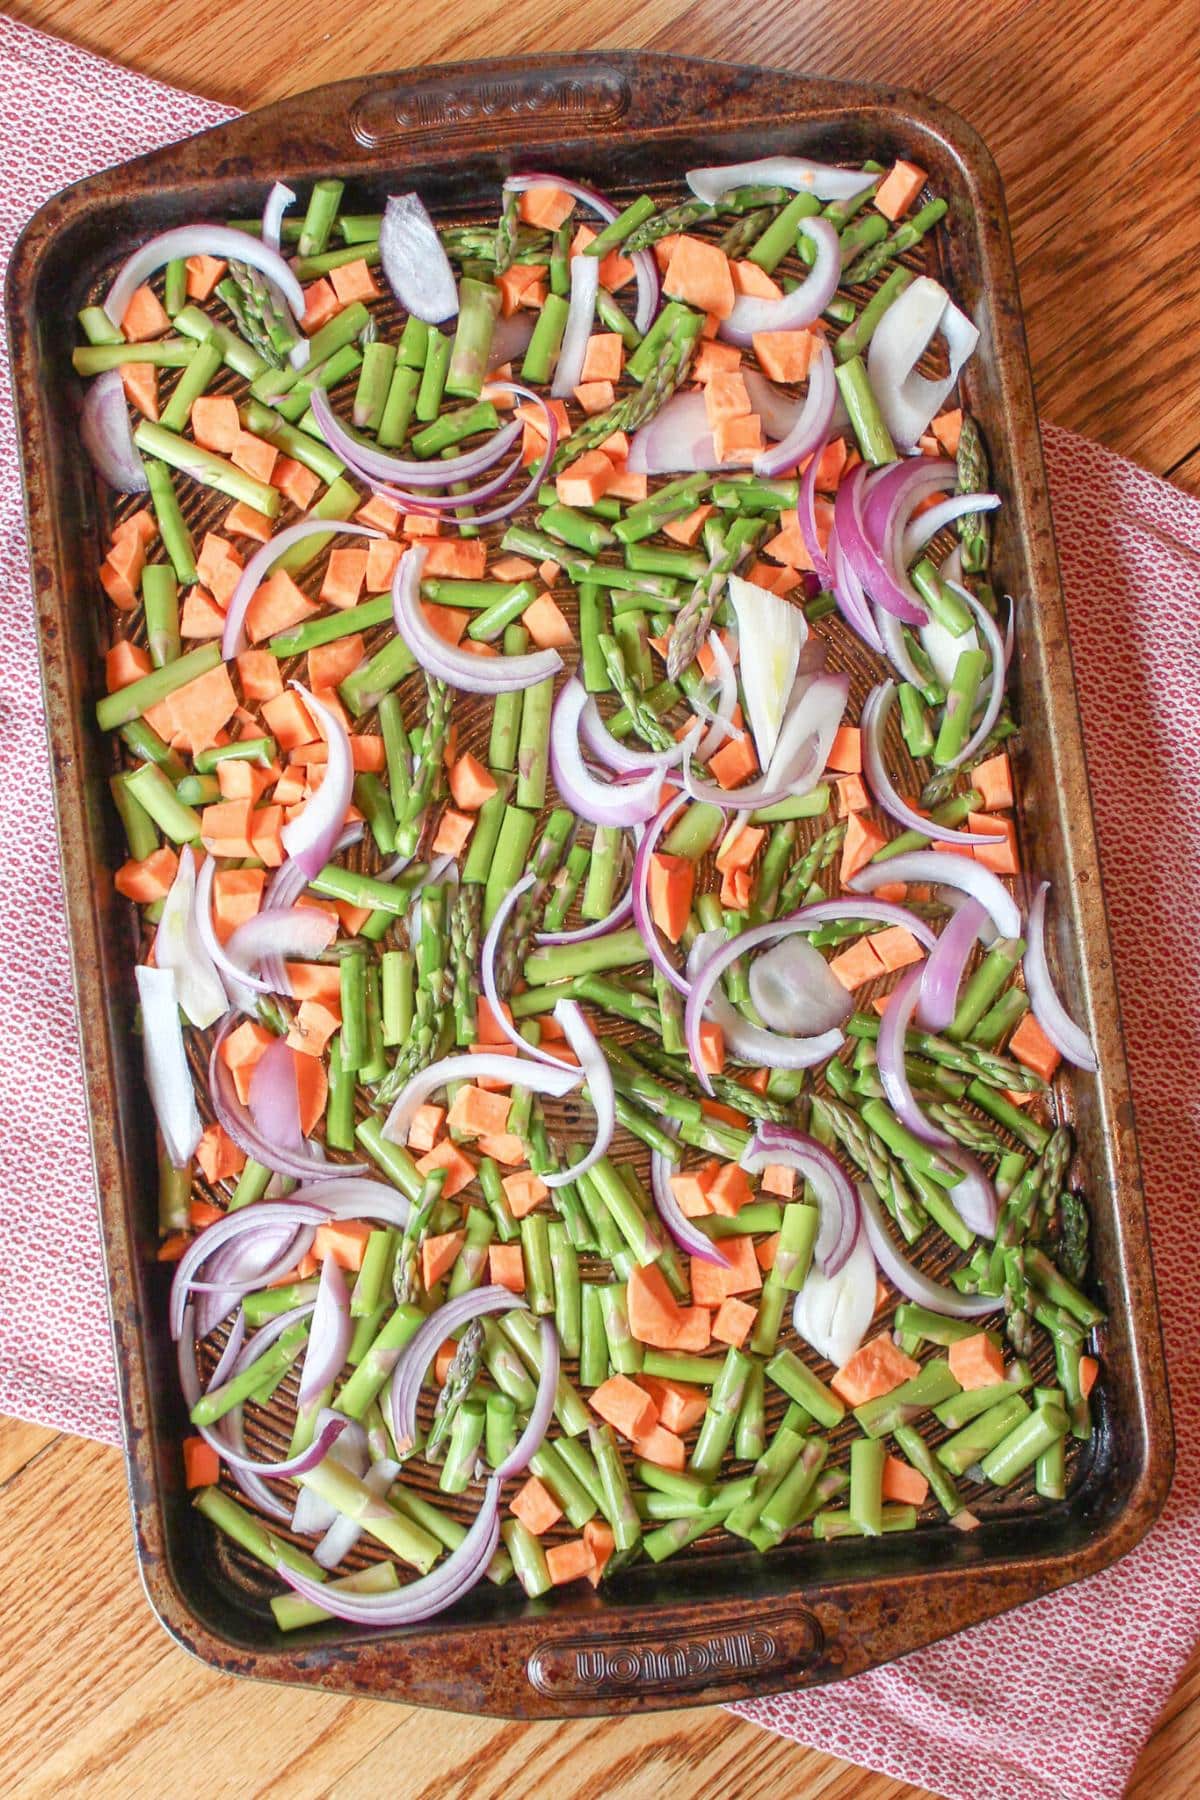 A baking sheet pan full of asparagus, sweet potatoes and red onions.